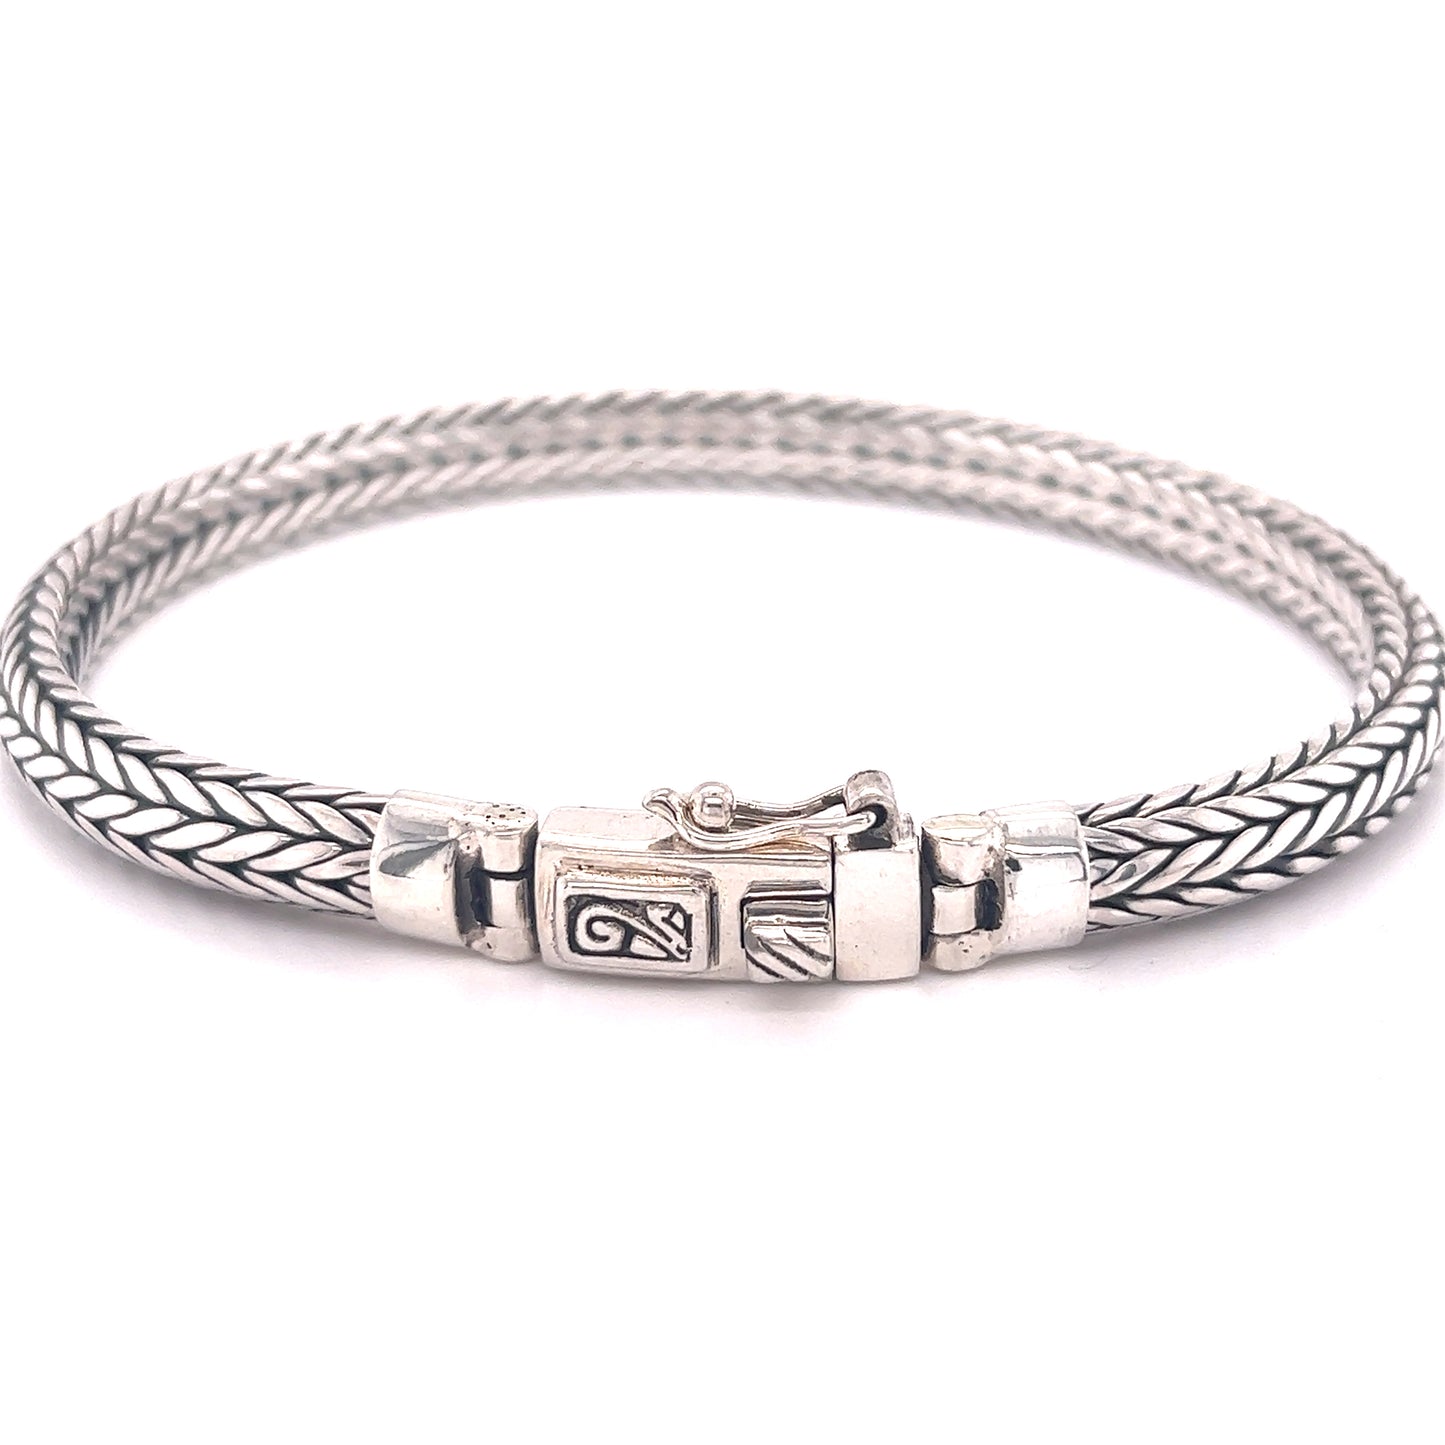 This Super Silver braided rope bracelet with a clasp offers a unique look and is comfortable to wear.